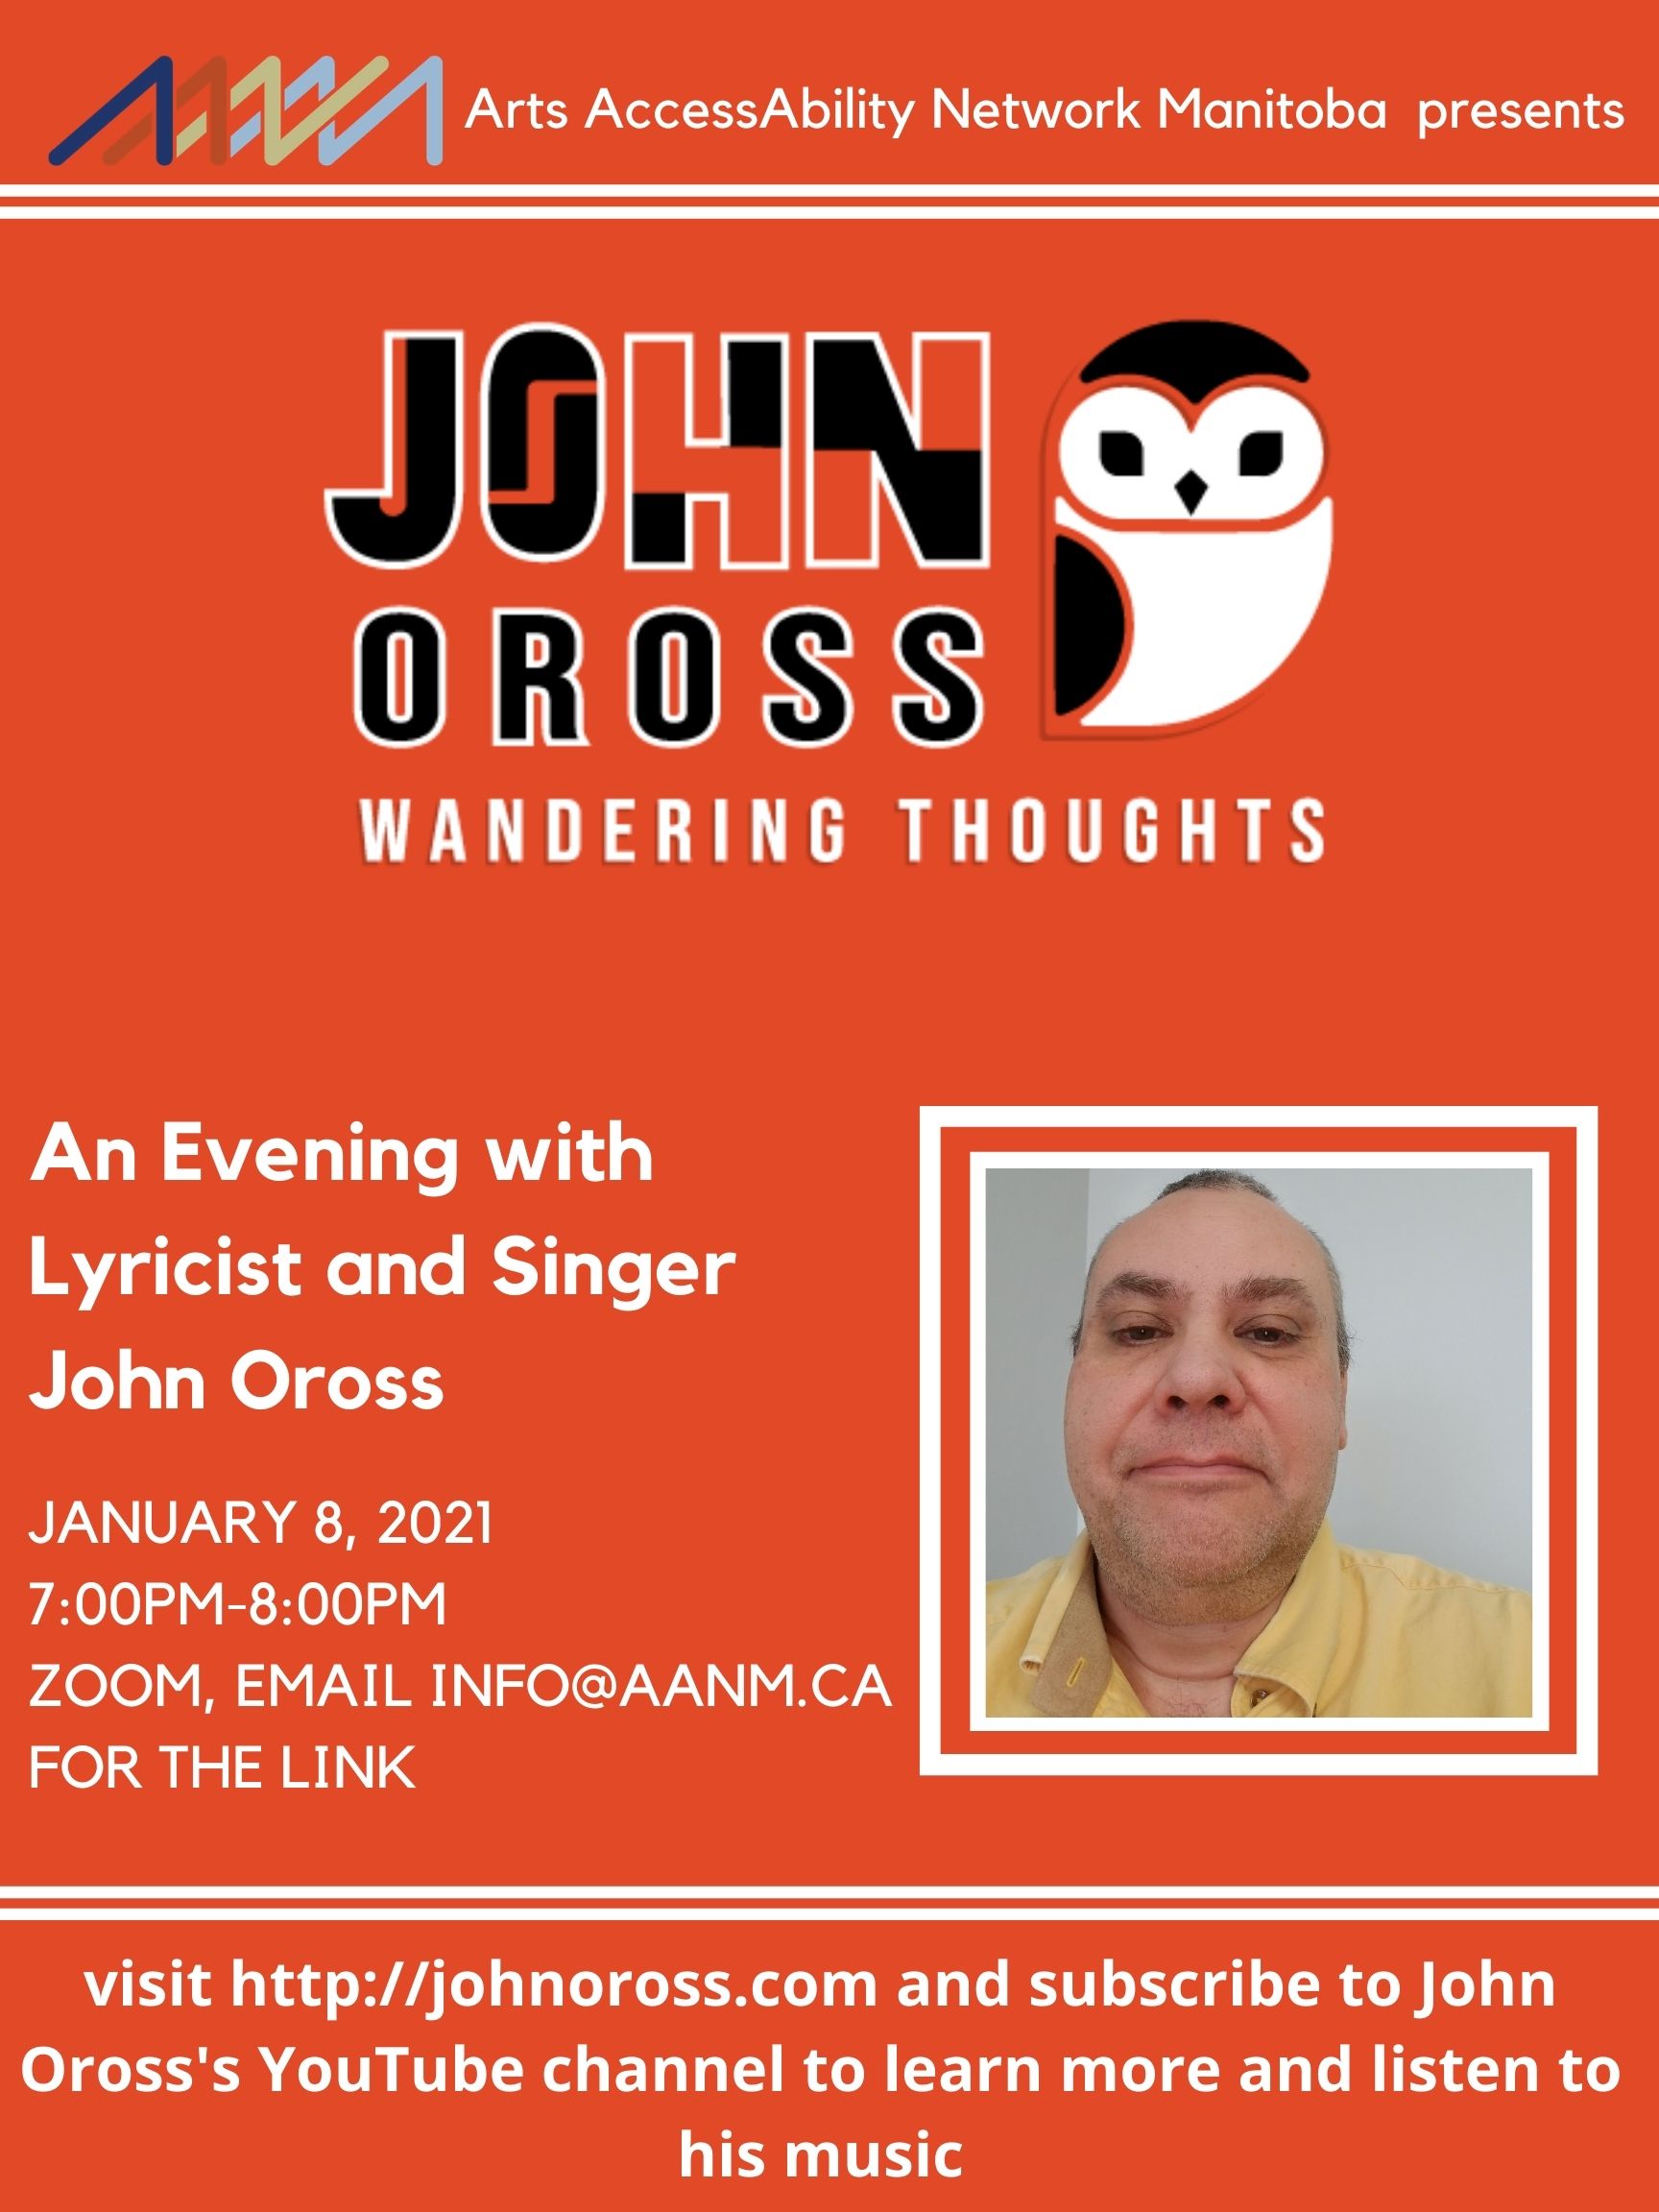 Poster with an orange background. At the top of the poster is the AANM logo. A second logo appear below that which includes the text "John Oross, wandering thoughts" and a black and white owl. There is a head shot of John Oross below and to the right of his logo. Other text on the poster" Arts AccessAbility Network Manitoba presents, An Evening with Lyricist and Singer John Oross, January 8, 2021 7:00PM-8:00pm Zoom, email info@aanm.ca for the link , visit http://johnoross.com and subscribe to John Oross's YouTube channel to learn more and listen to his music